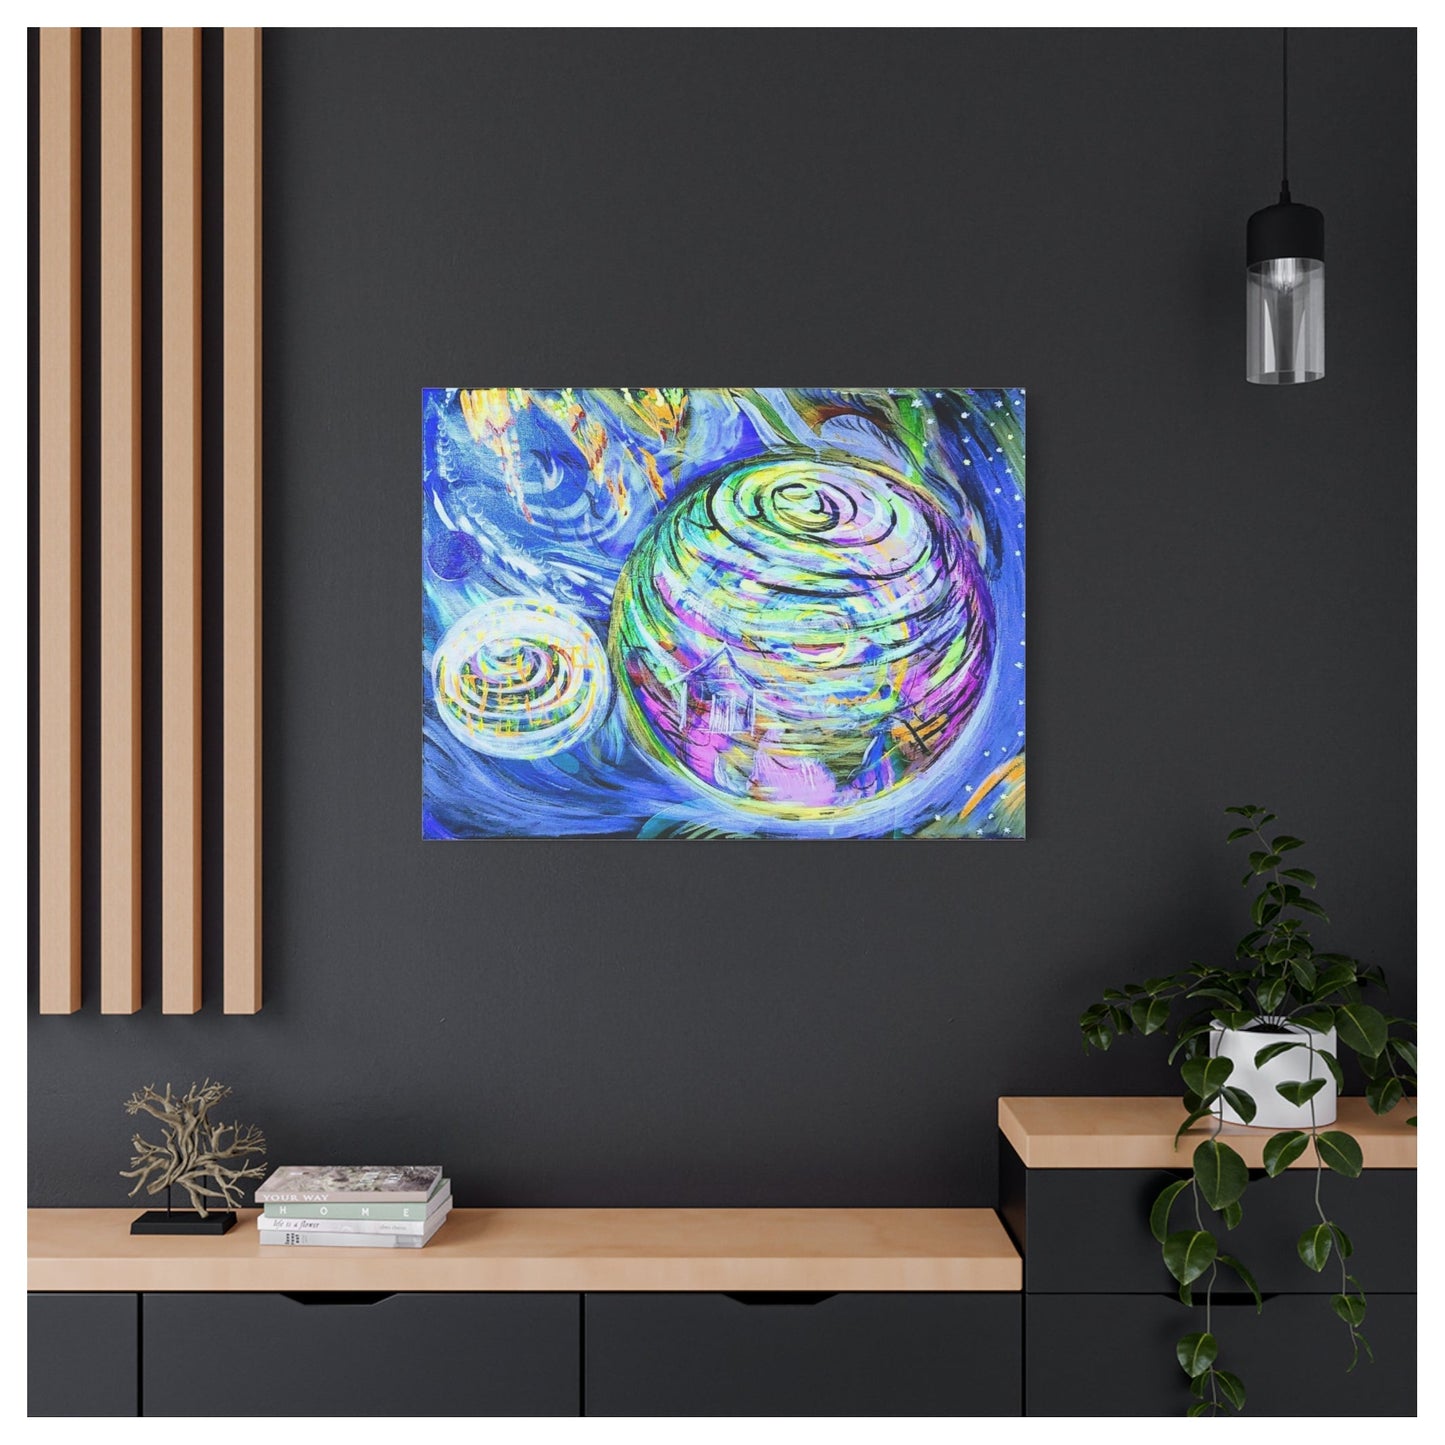 Cosmic Universe - Unique, Original Handmade Painting, Home Decor Abstract Wall Art | 24" x 18"